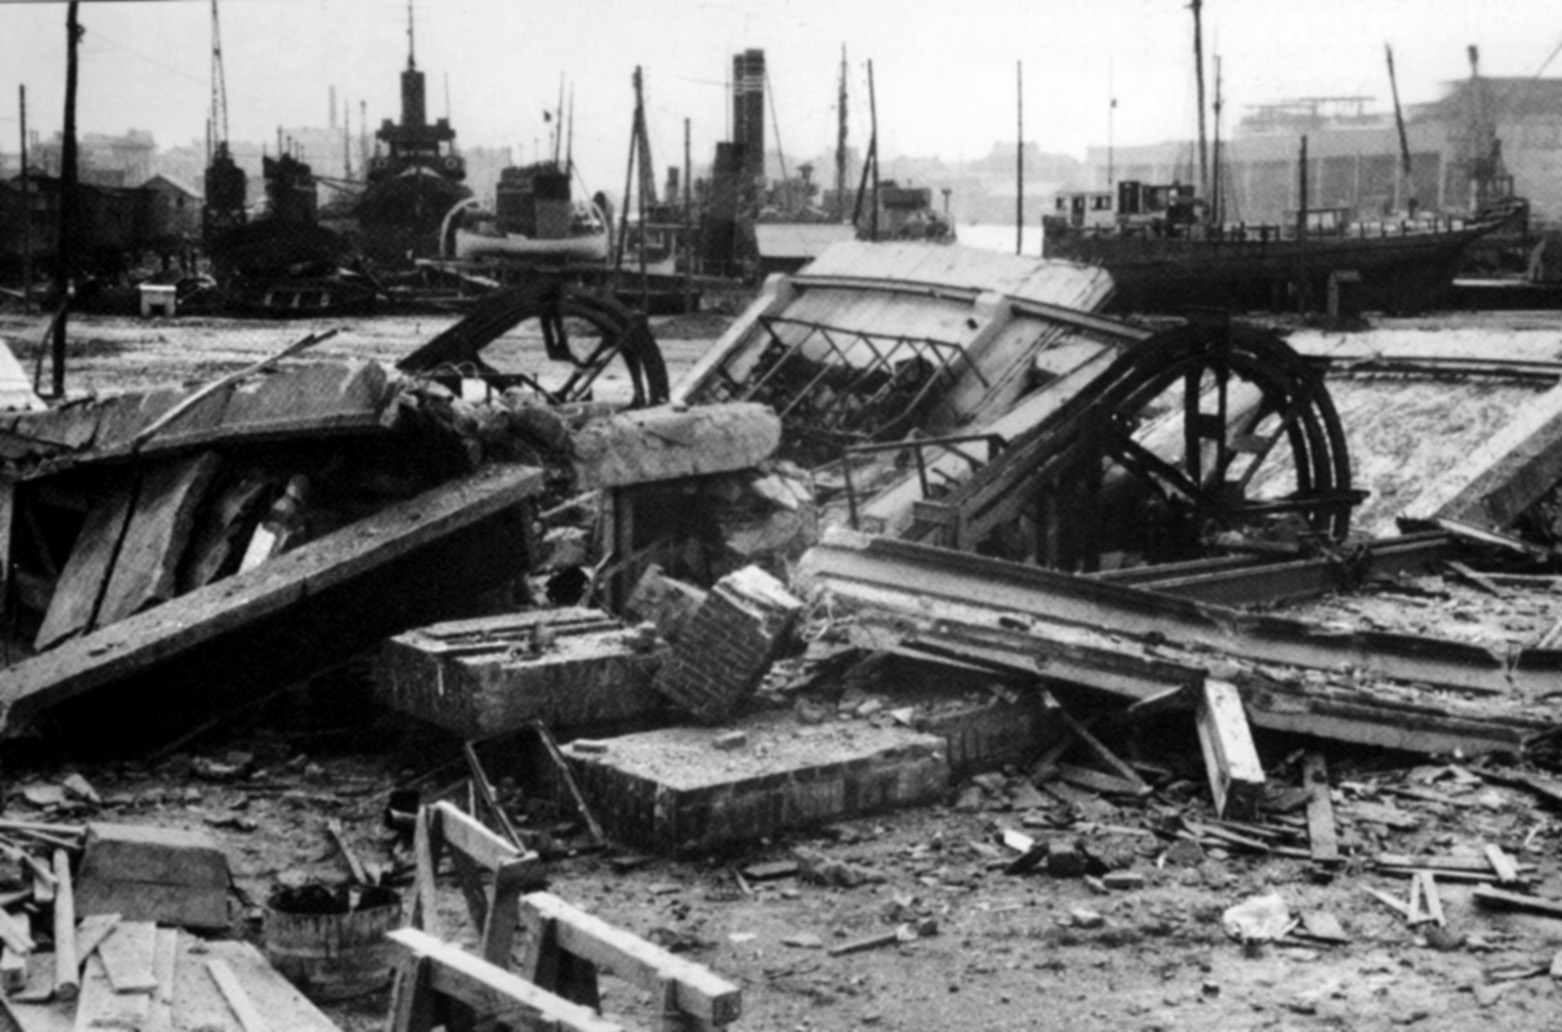 The shattered remains of the winding shed. Not only did the exploding HMS Campbeltown cause immense damage, the Commando teams also added to the destruction by demolishing other key targets in the dock area. 